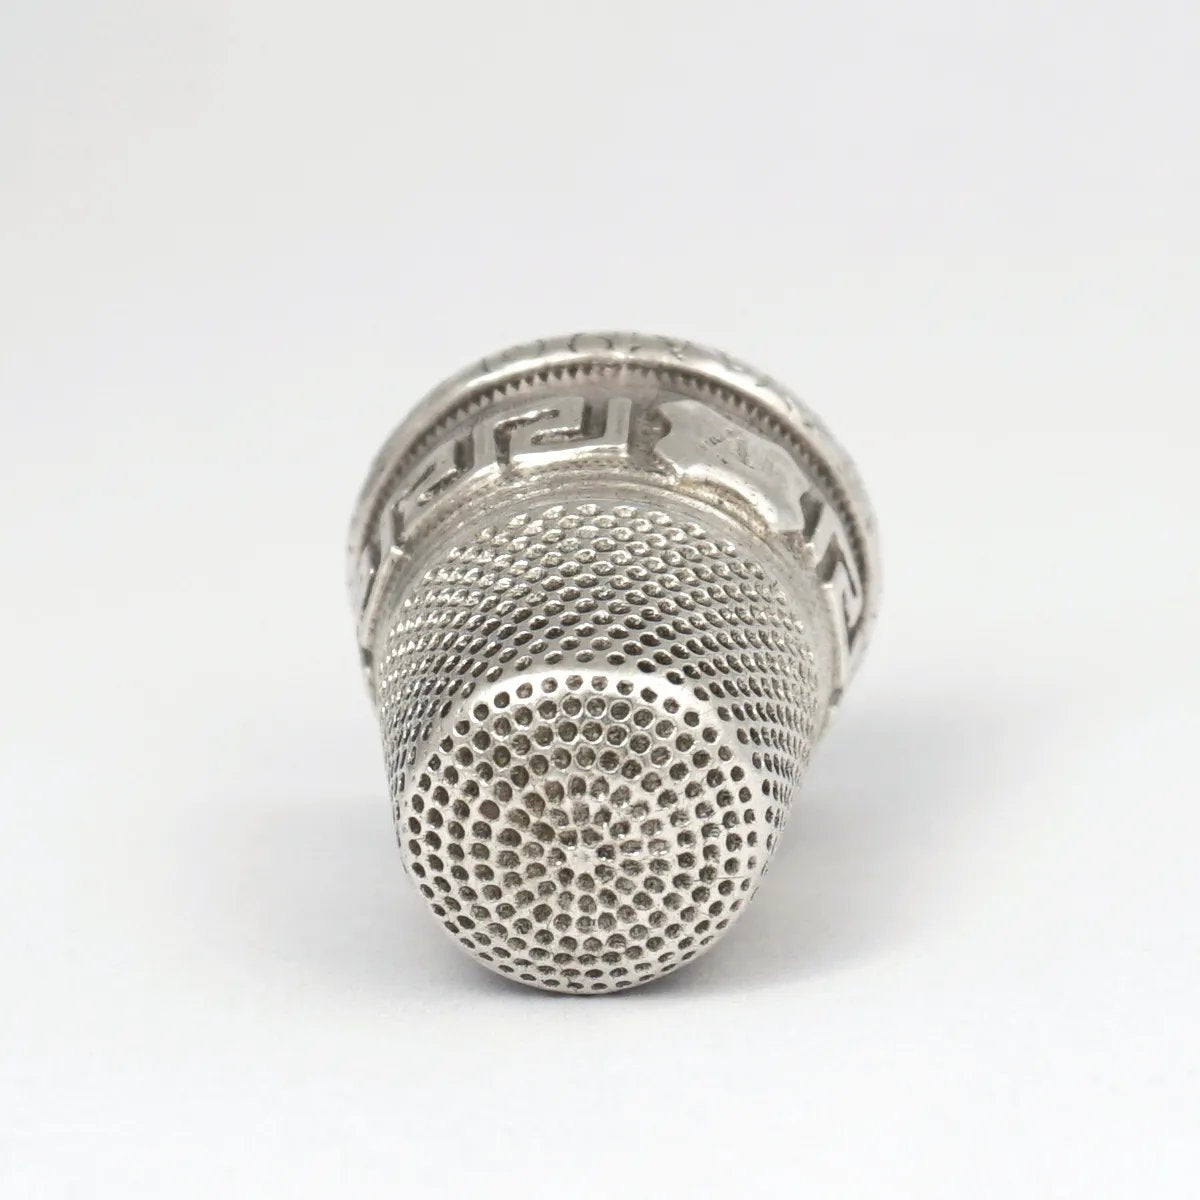 METAL METAL THIMBLE Silver Thimbles for Hand Sewing Needlework Accessories  $11.11 - PicClick AU